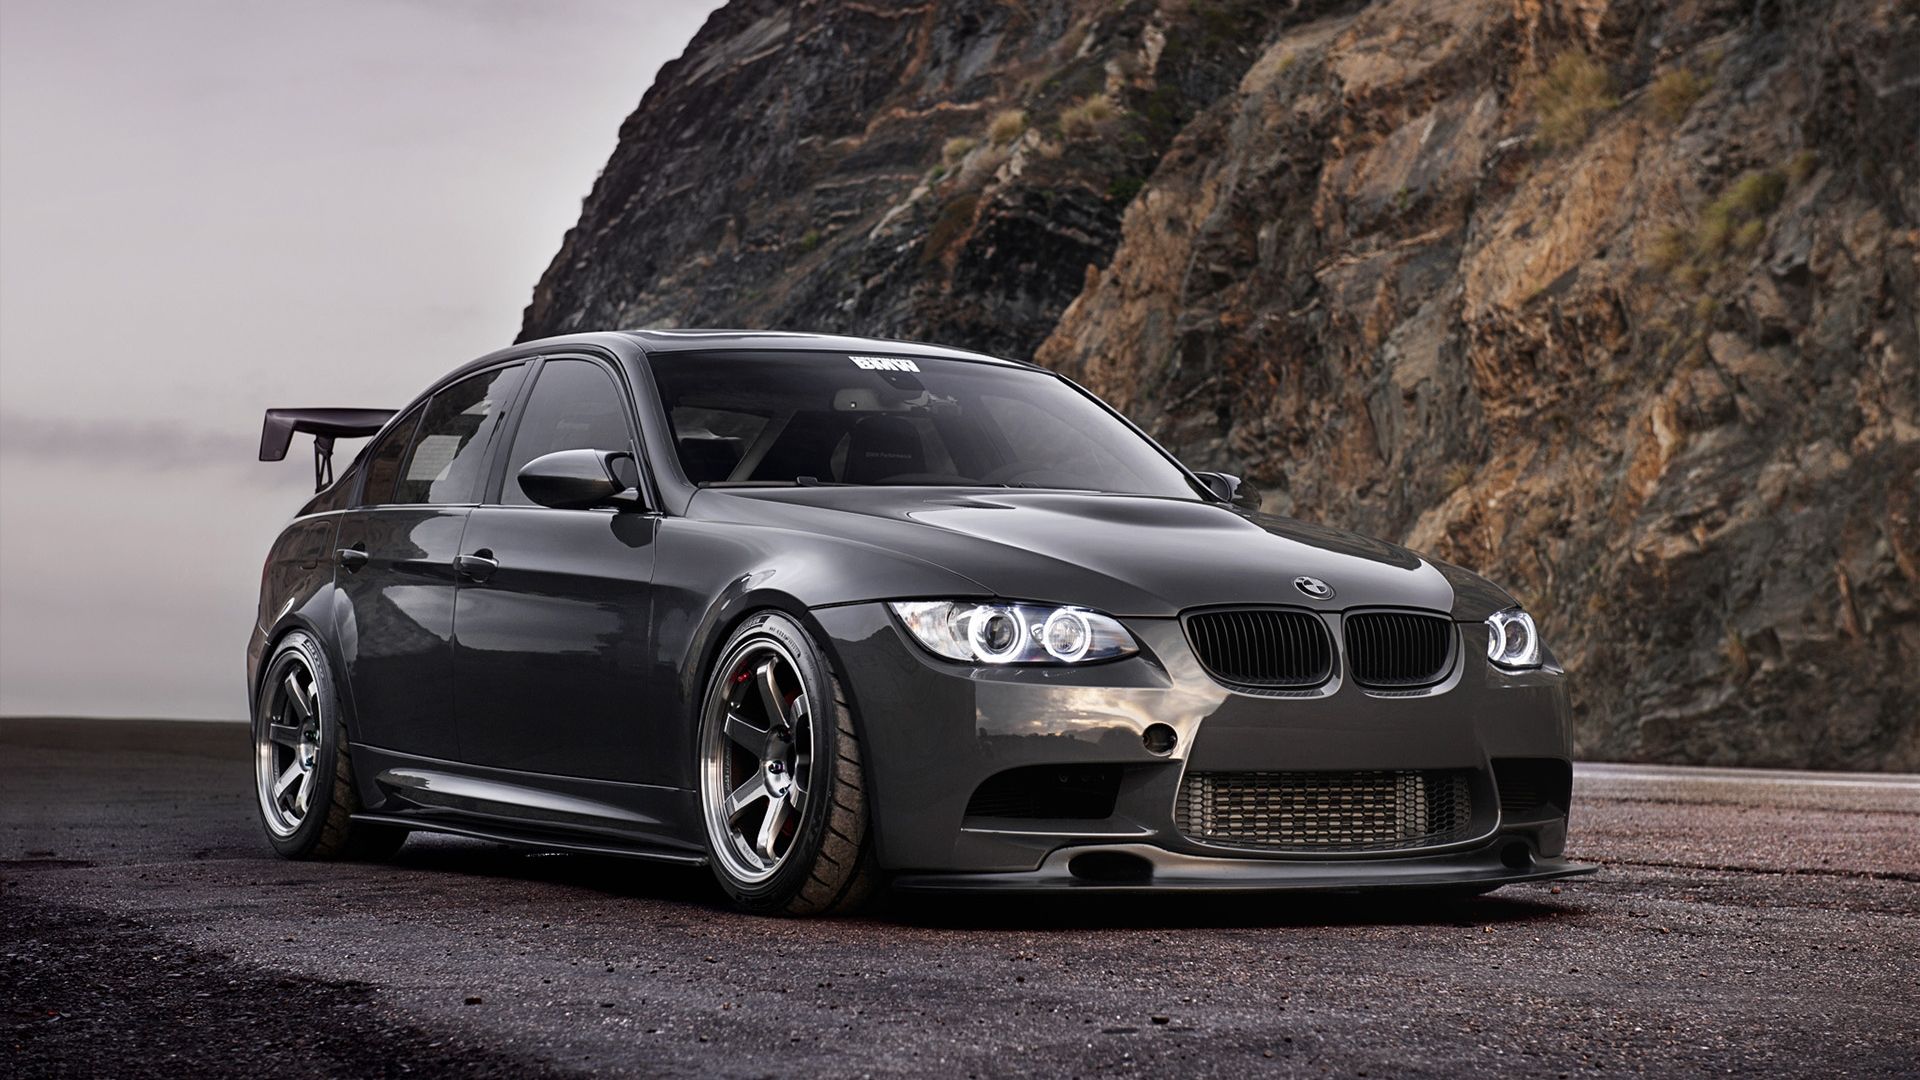 Free download Bmw 335i iPhone Wallpaper image 12 [1920x1278] for your Desktop, Mobile & Tablet. Explore BMW E92 Wallpaper. BMW E92 Wallpaper, E92 M3 Wallpaper, BMW Wallpaper